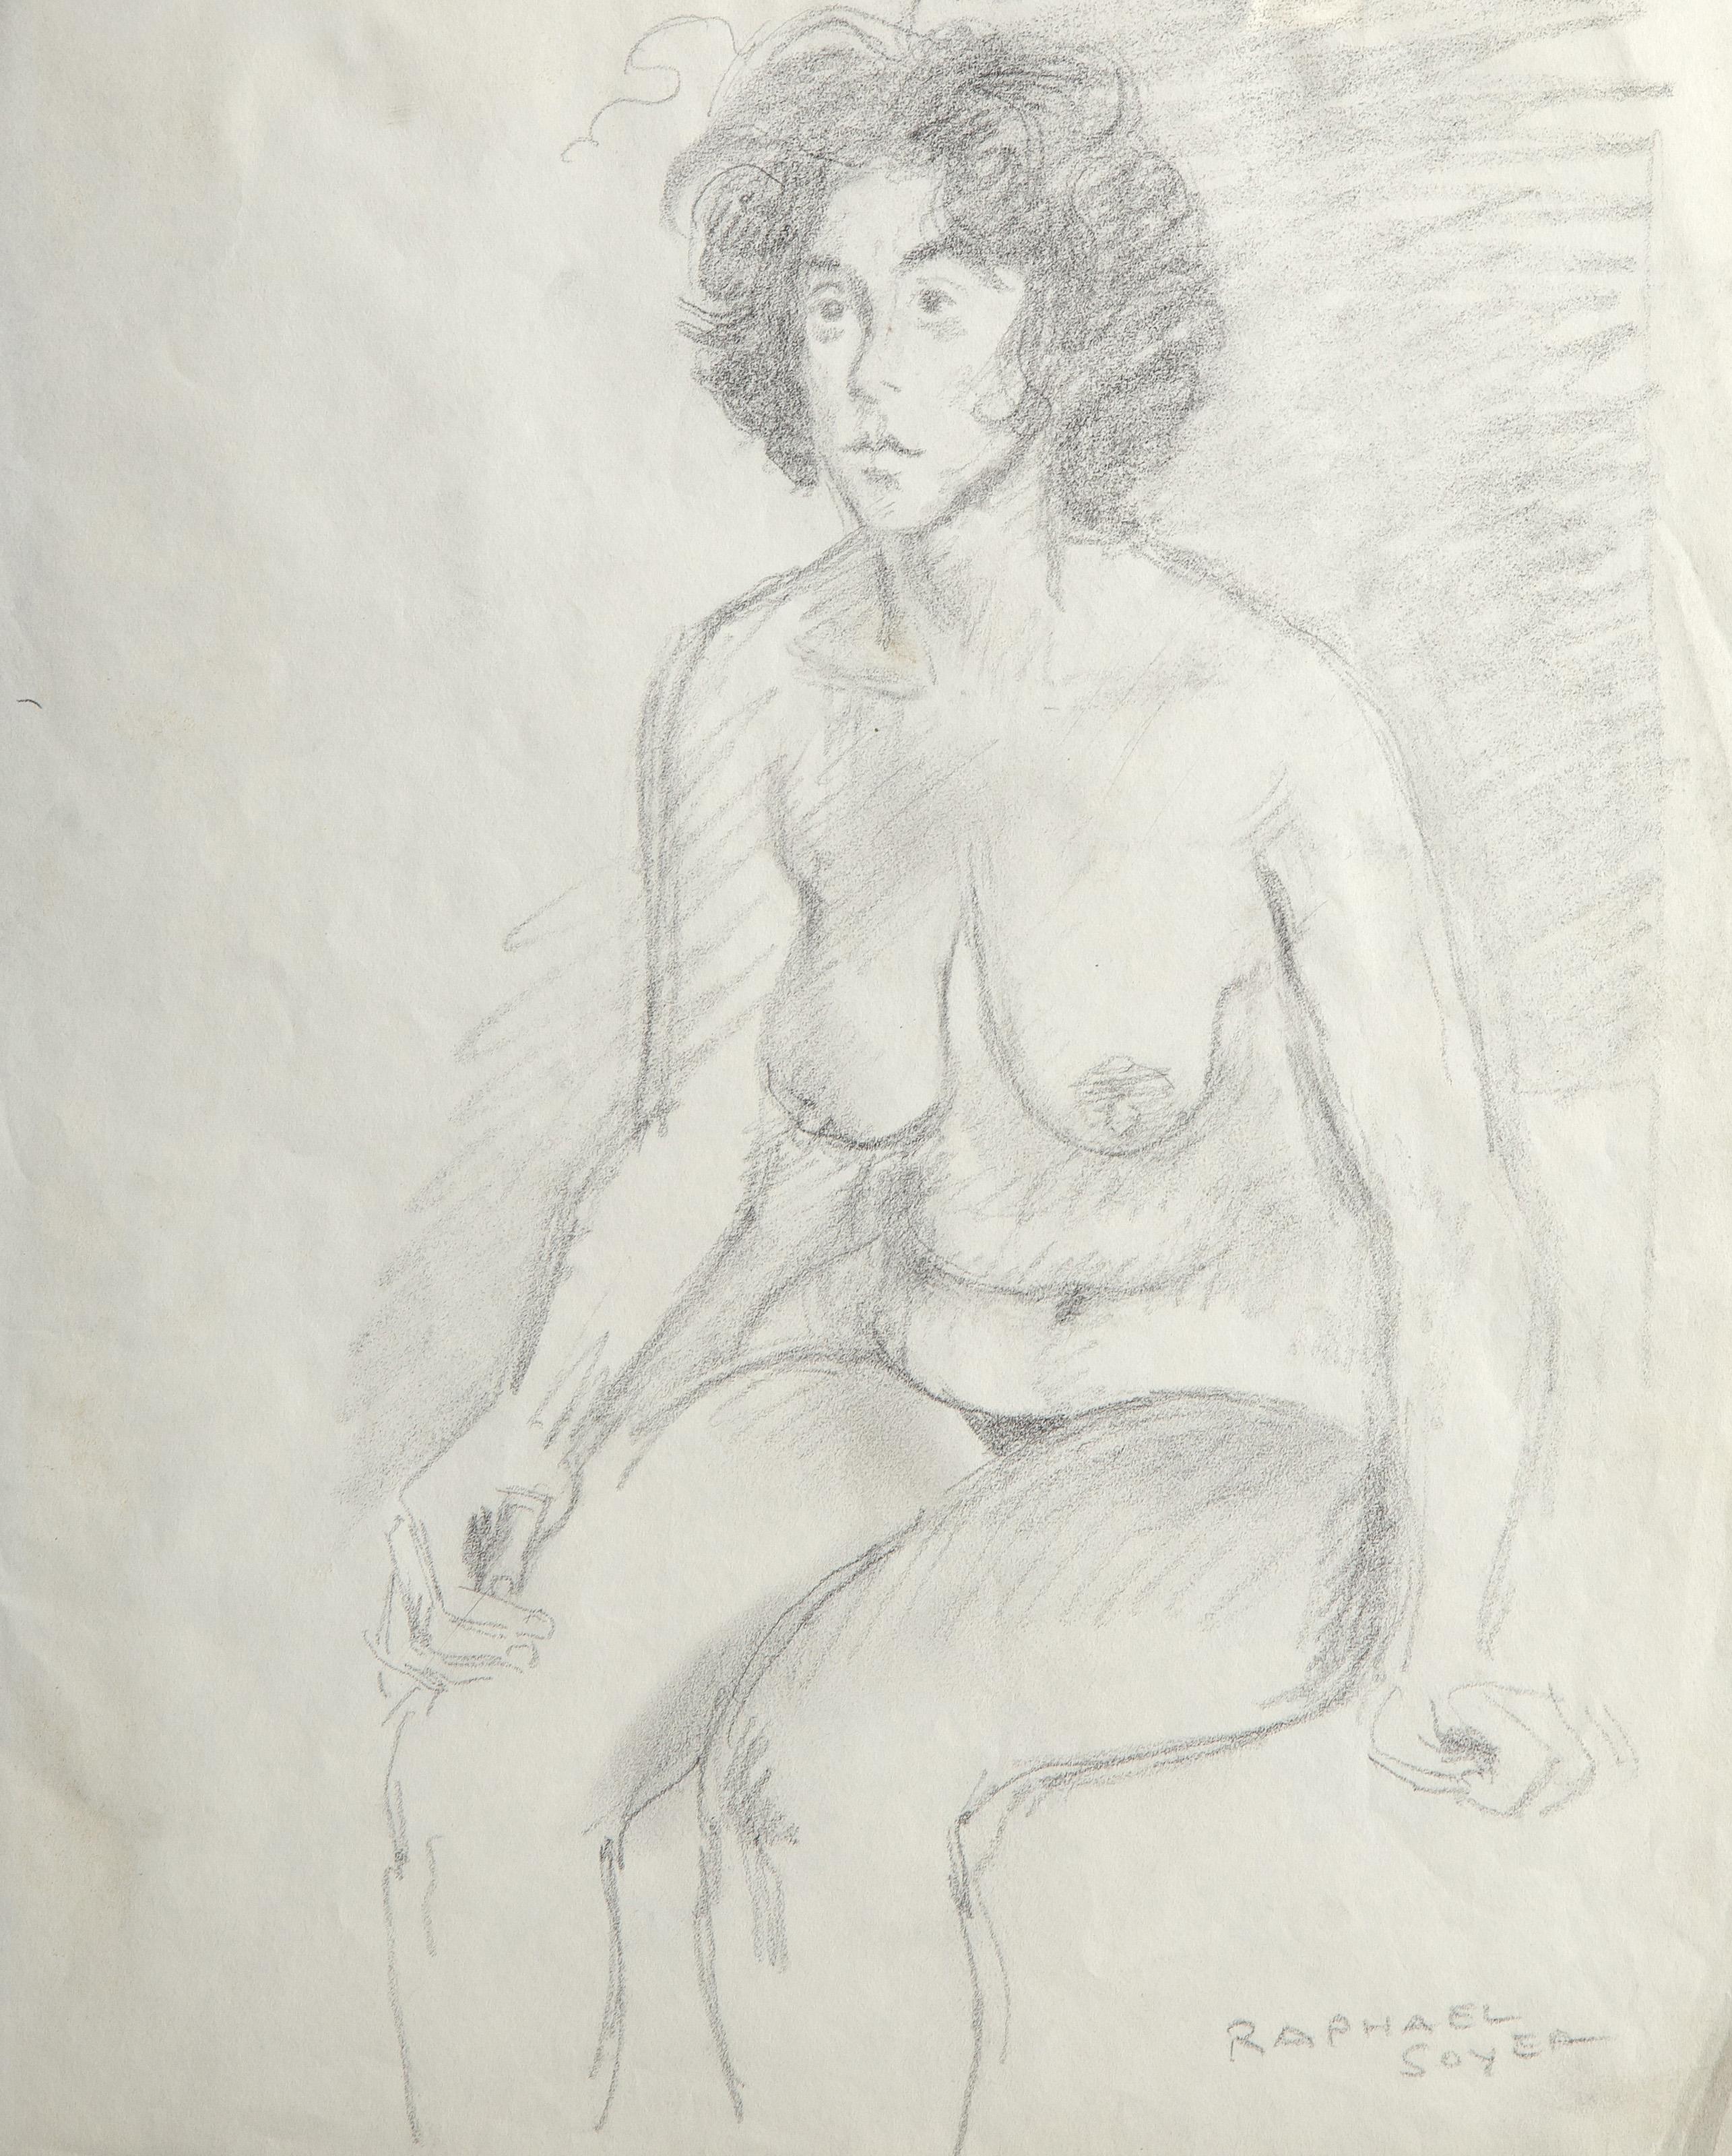 Raphael Soyer, Russian/American (1899 - 1987) -  Sitting Woman. Medium: Graphite on Paper, signed in pencil, Size: 12.5 x 10 in. (31.75 x 25.4 cm) 